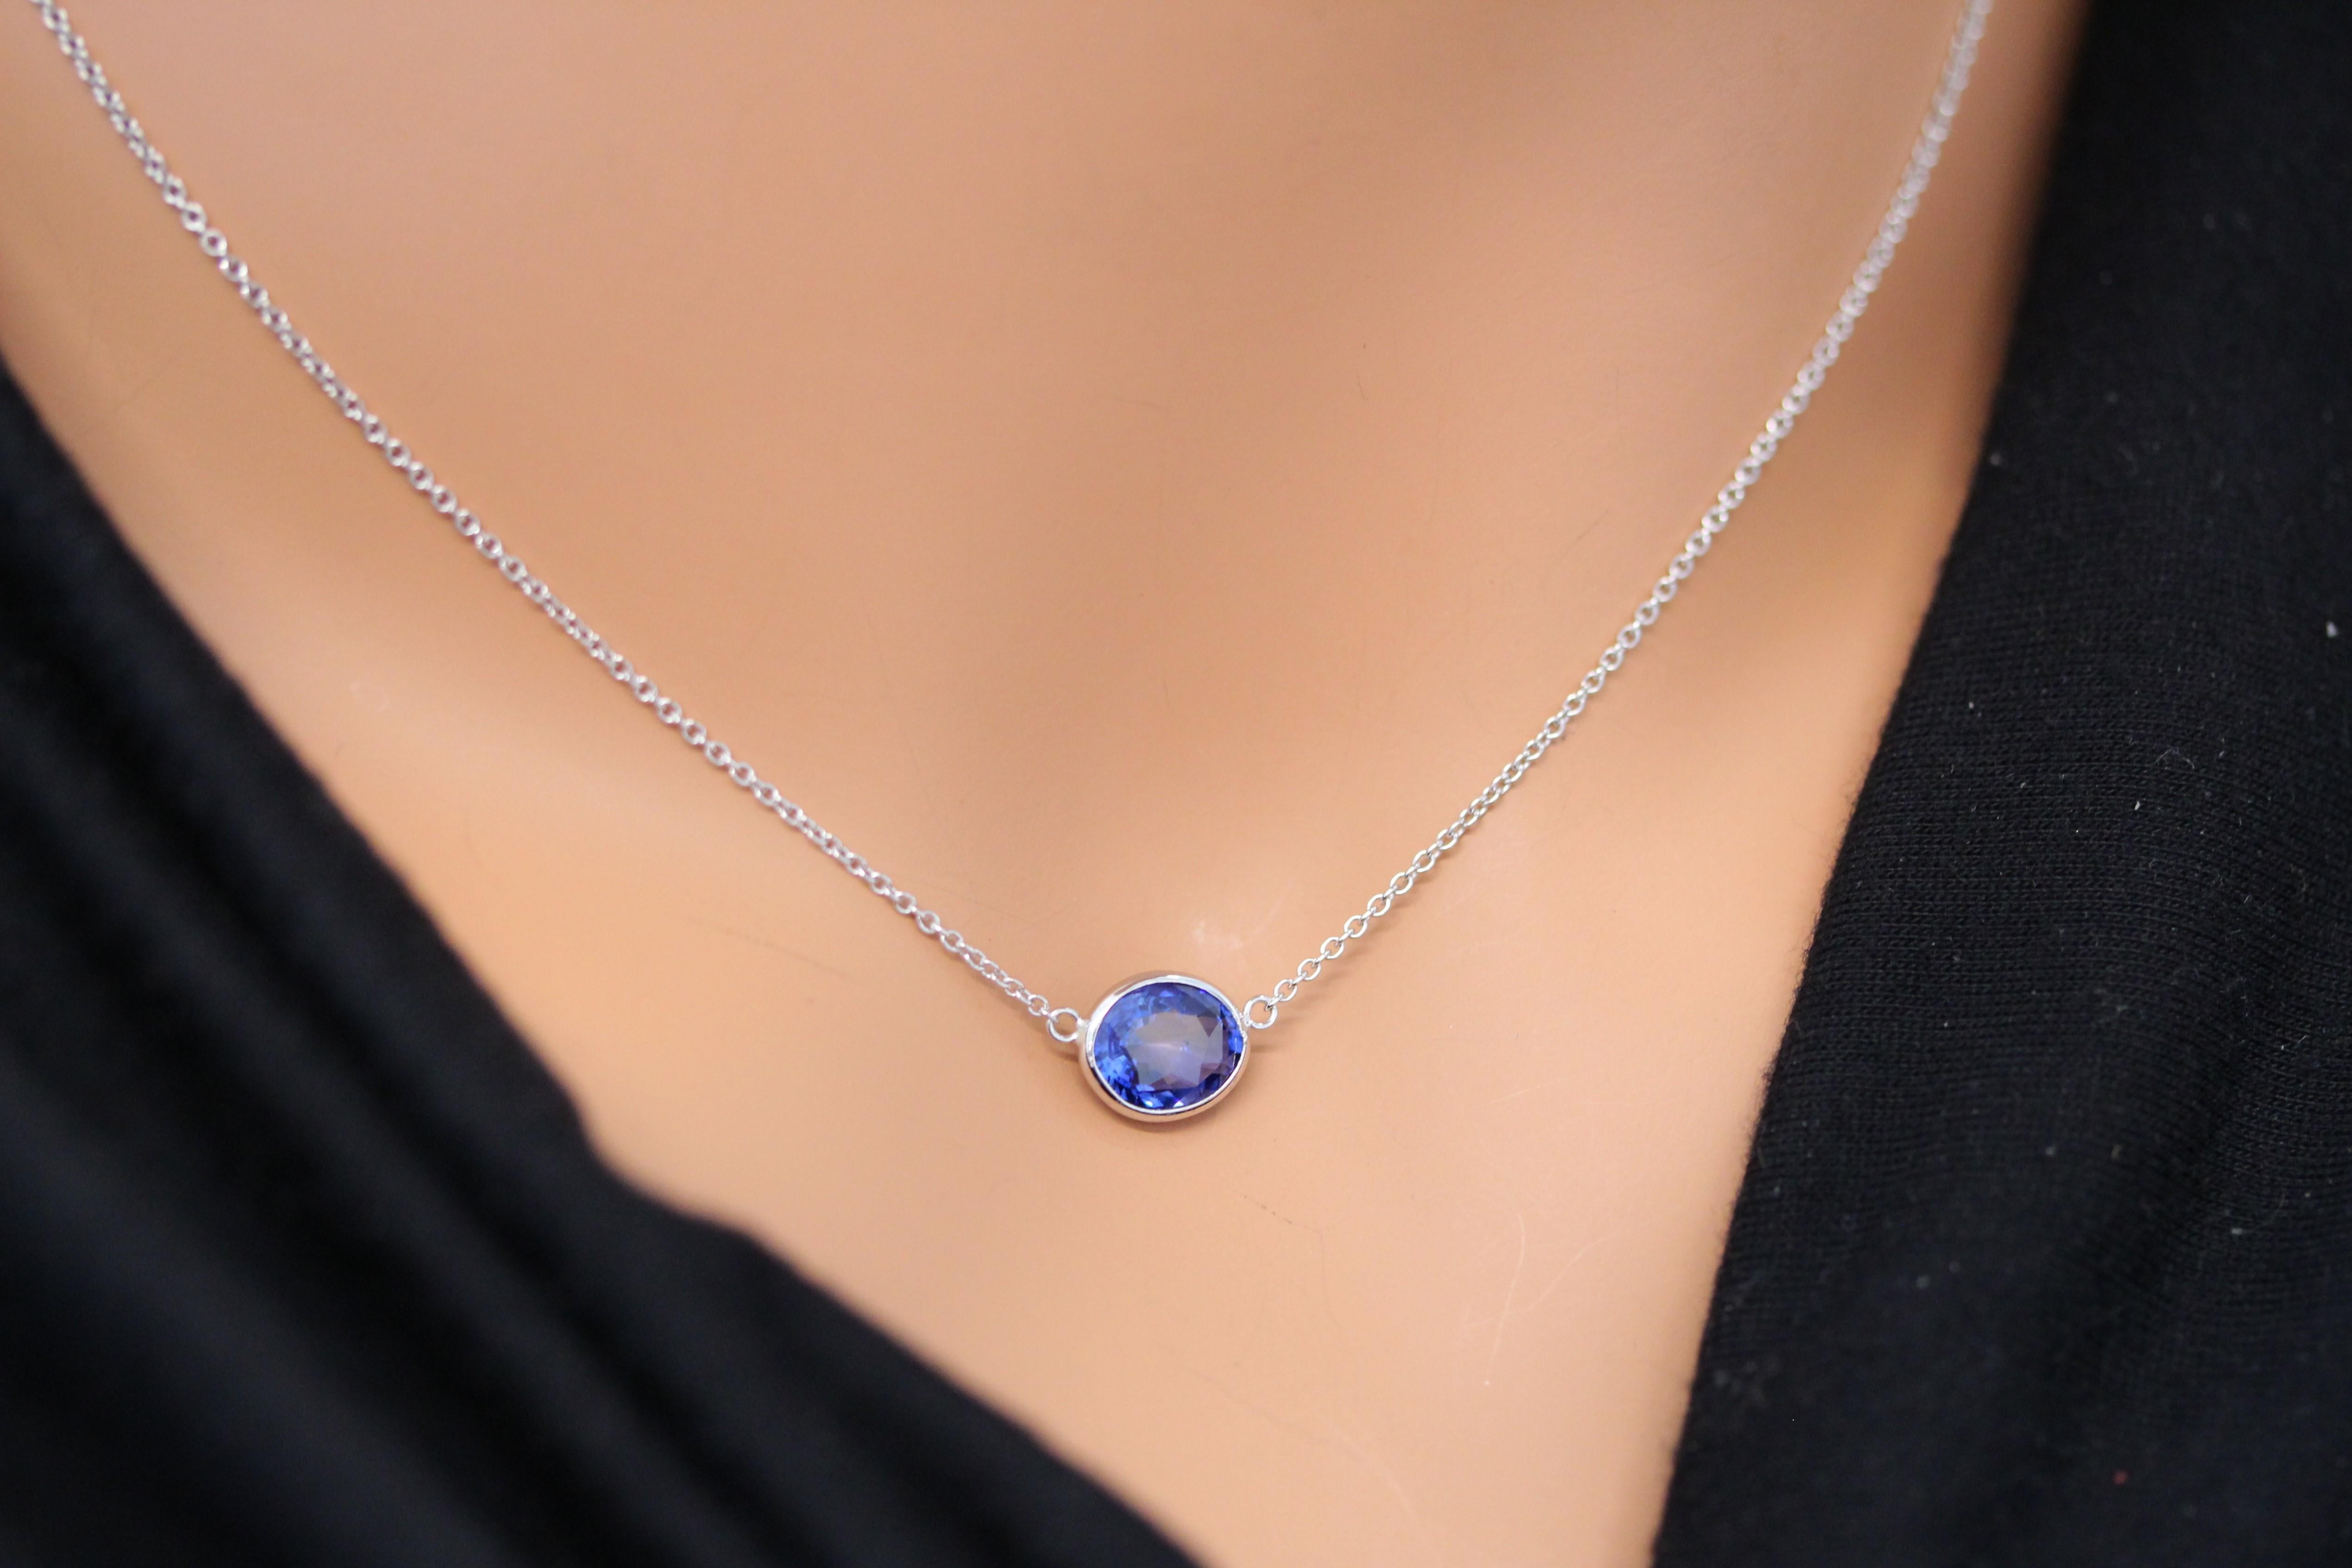 Oval Cut 2.76 Carat Oval Sapphire Blue Fashion Necklaces In 14k White Gold For Sale